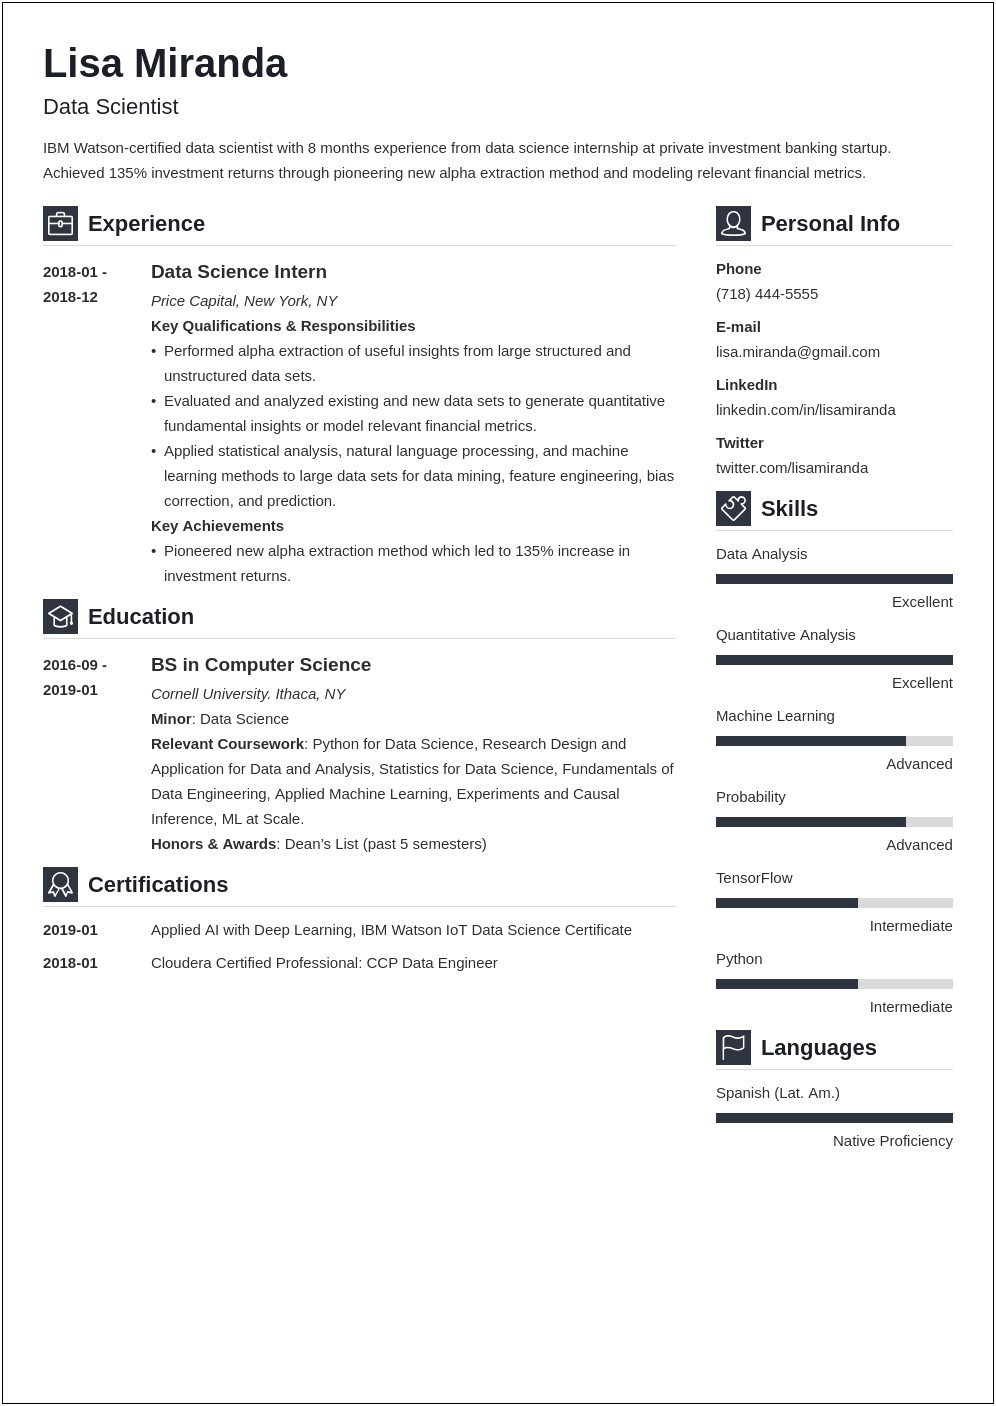 Recent College Graduate Resume Objective Examples